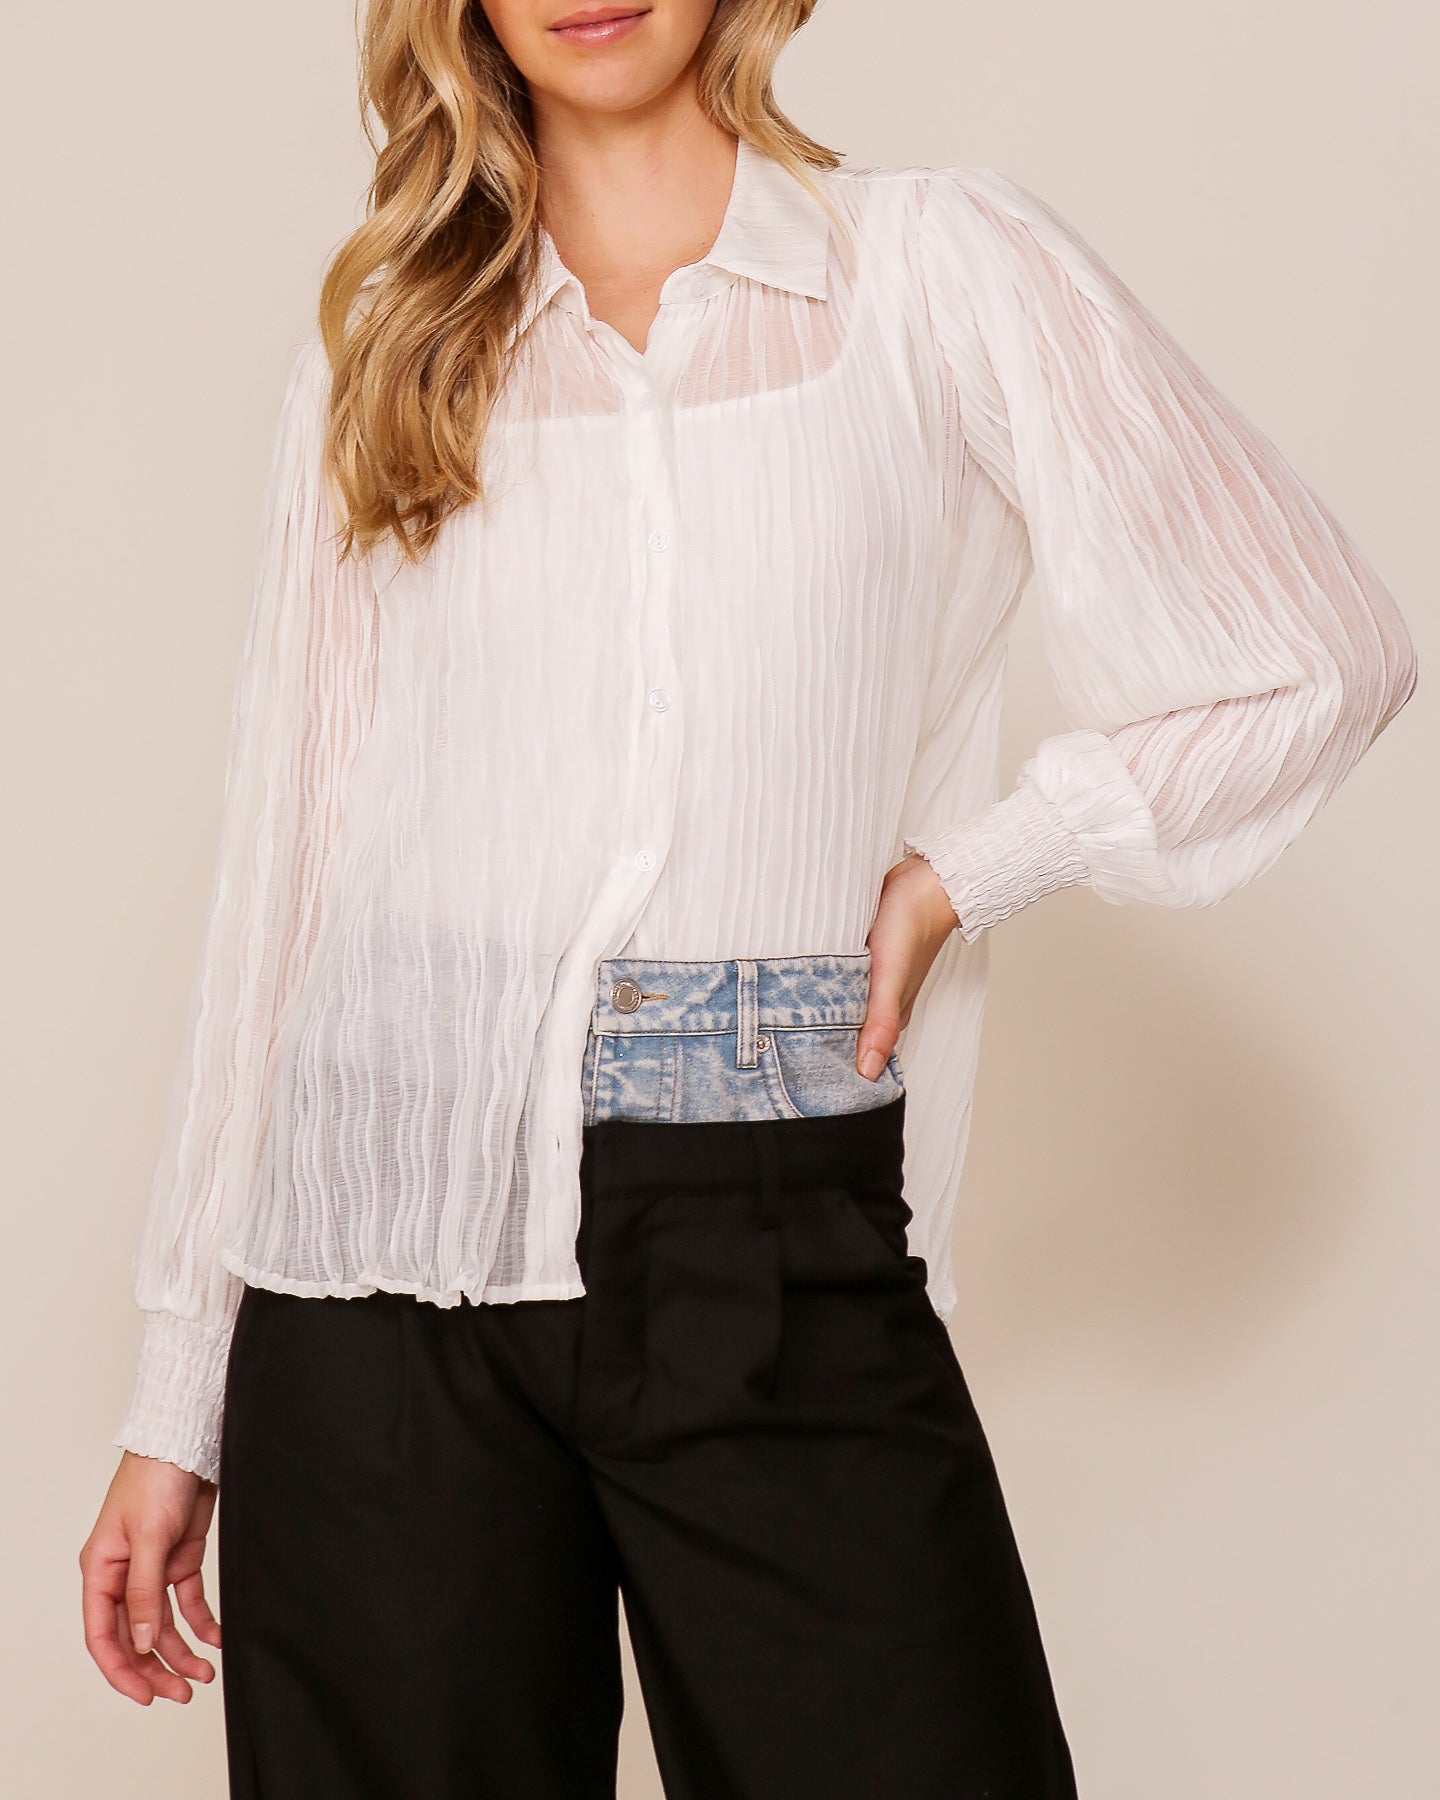 Rena Crinkle Button Down